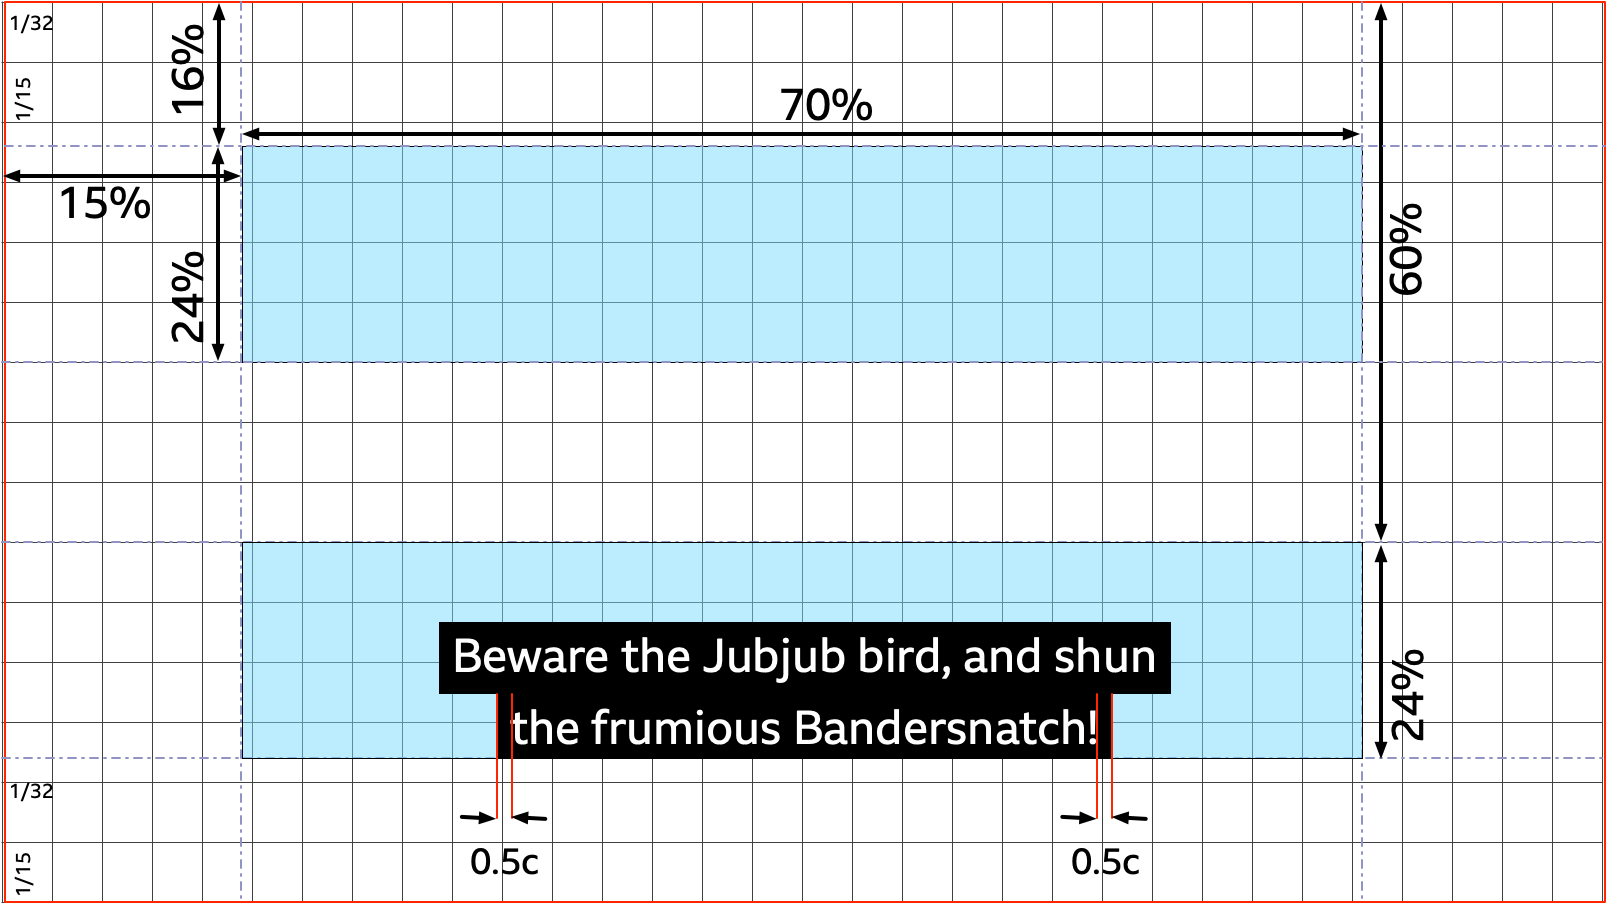 Image showing rendering of example, with text 'Beware the Jubjub bird' etc in lower region of image, on a 32x15 cell grid.